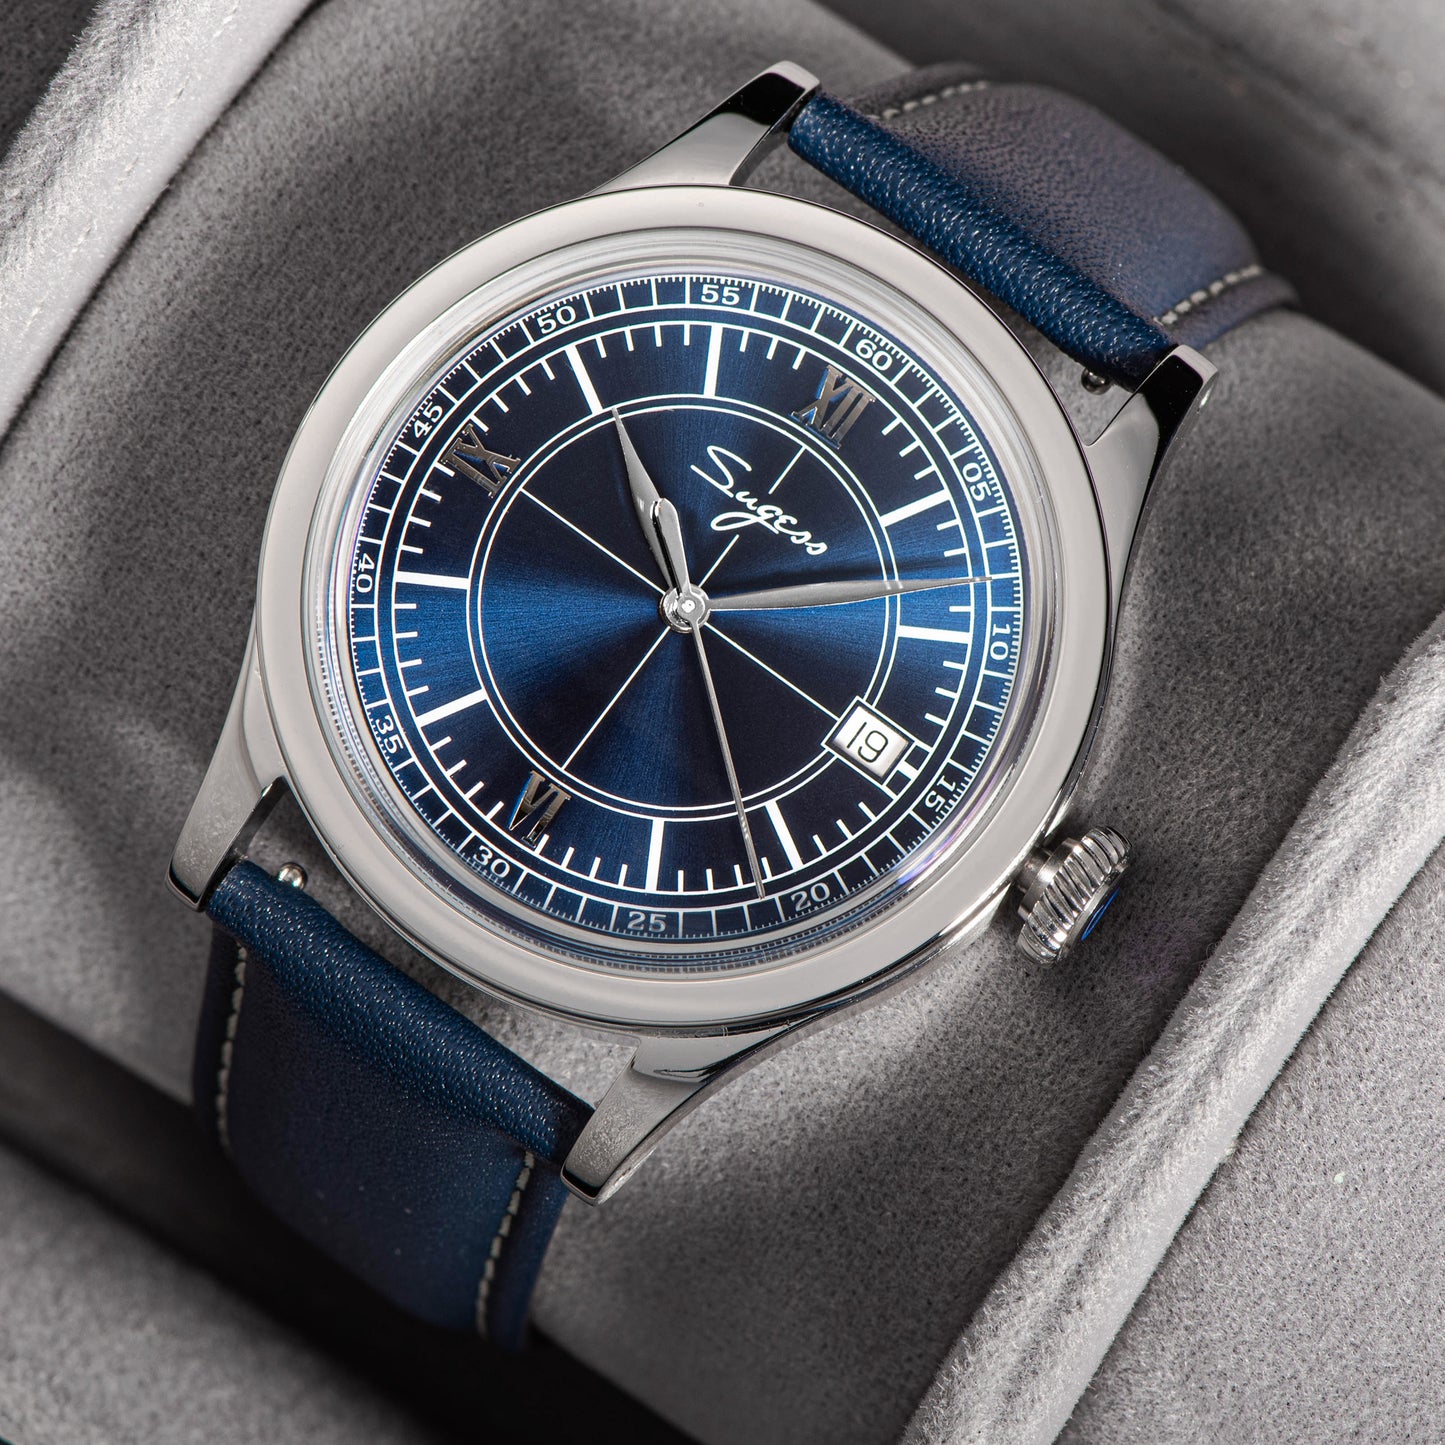 Heritage 411-3B Seagull 2130 Movement  Stainless Steel Case Deep Blue Dial SU4113BDB